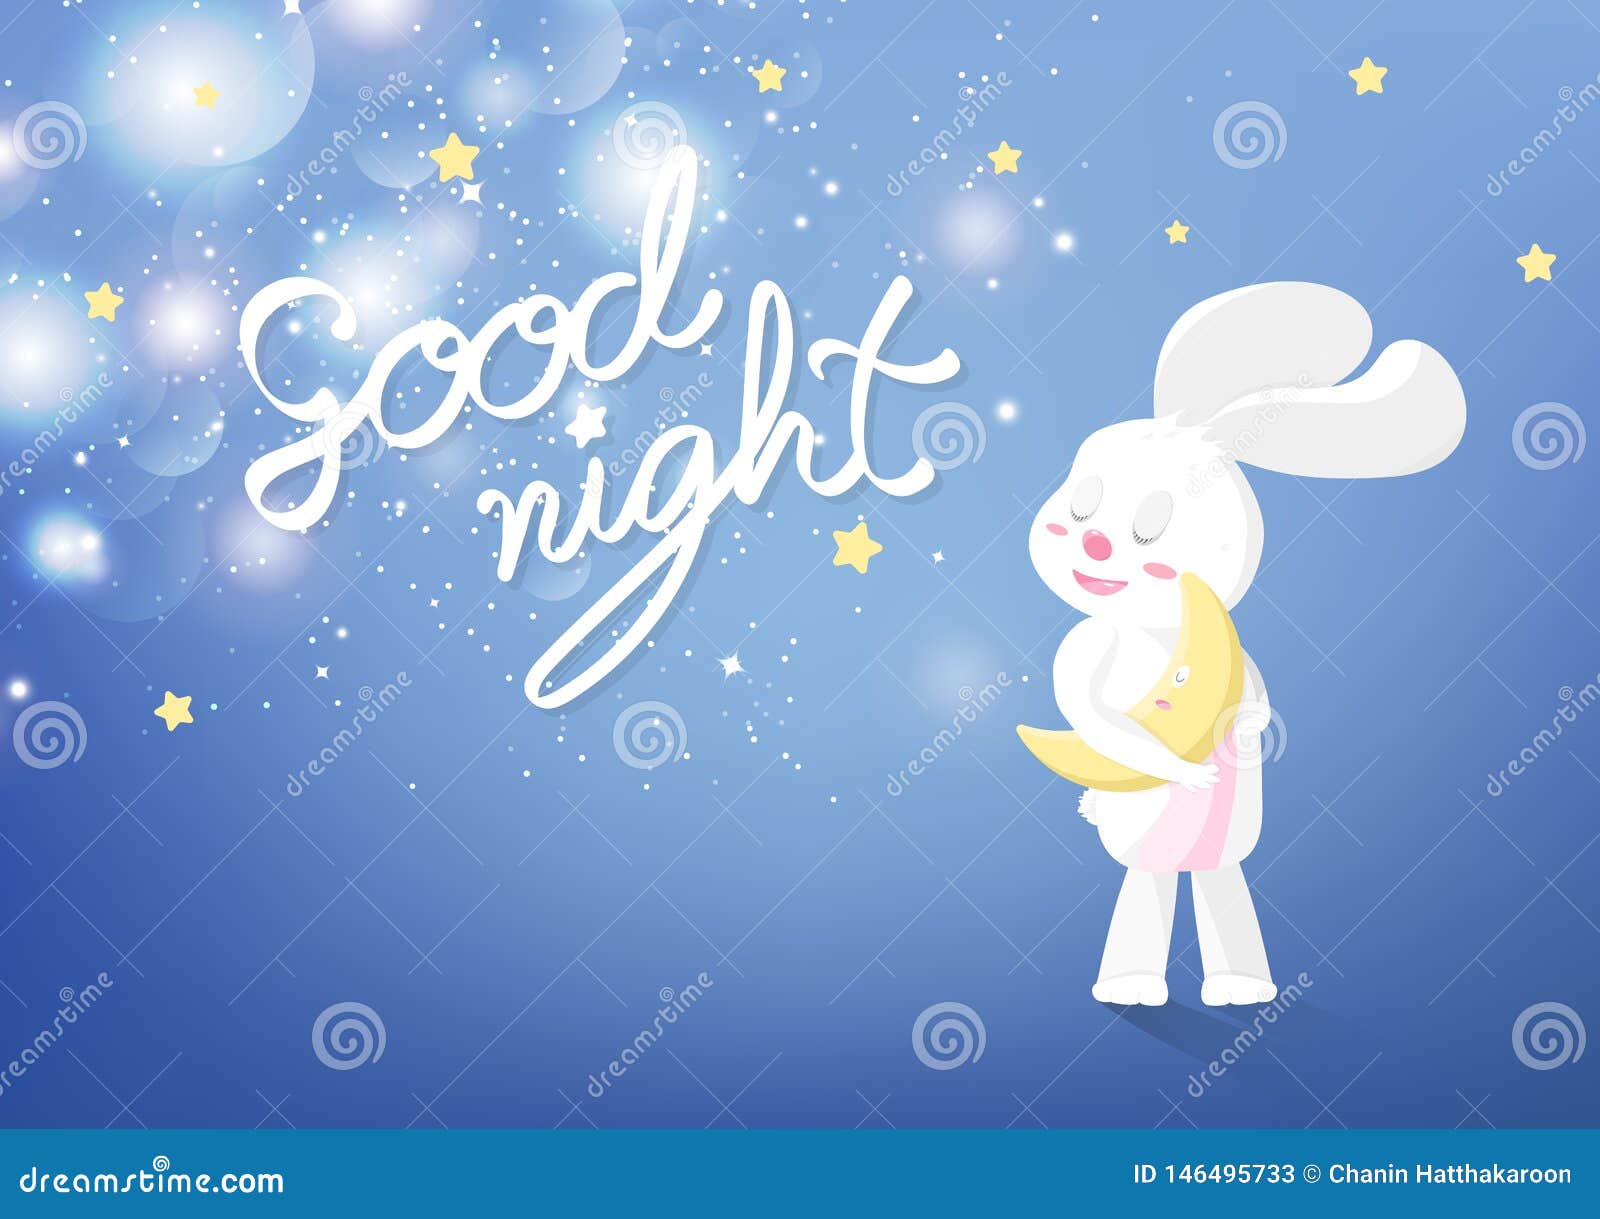 Good Night, Calligraphy, Sweet Dream Greeting Card Background Cover  Template Decoration, Adorable Bunny Sleeping Under Magic Stars Stock Vector  - Illustration of happiness, adorable: 146495733